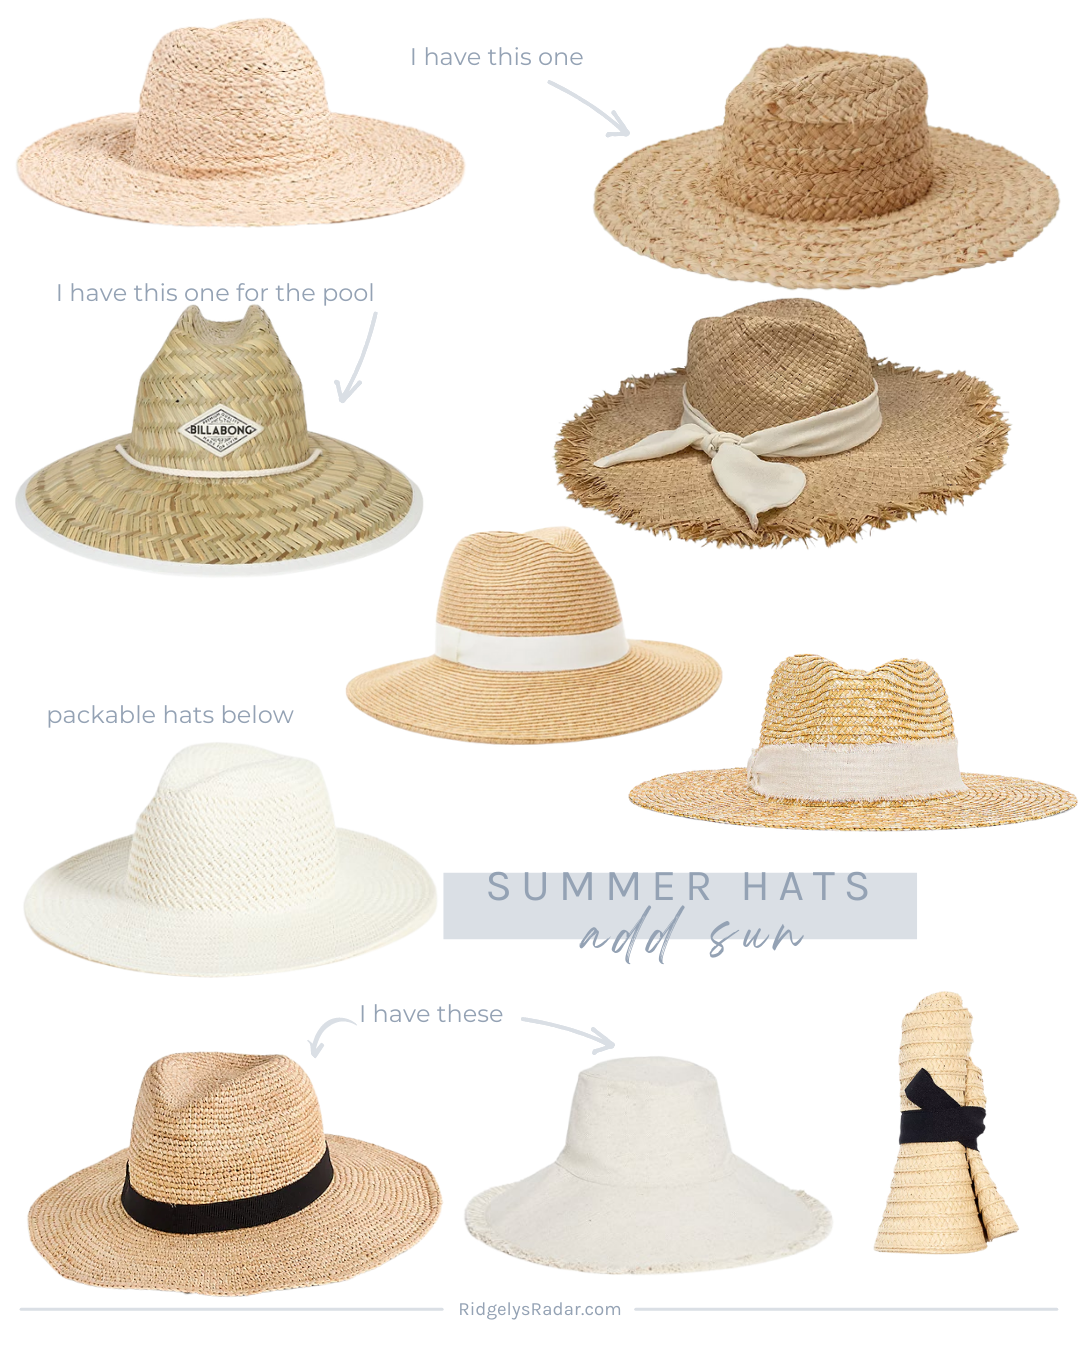 Straw hats are a Summer staple. Great for the beach, pool, around town for sun protection, plus perfect a bad hair day!